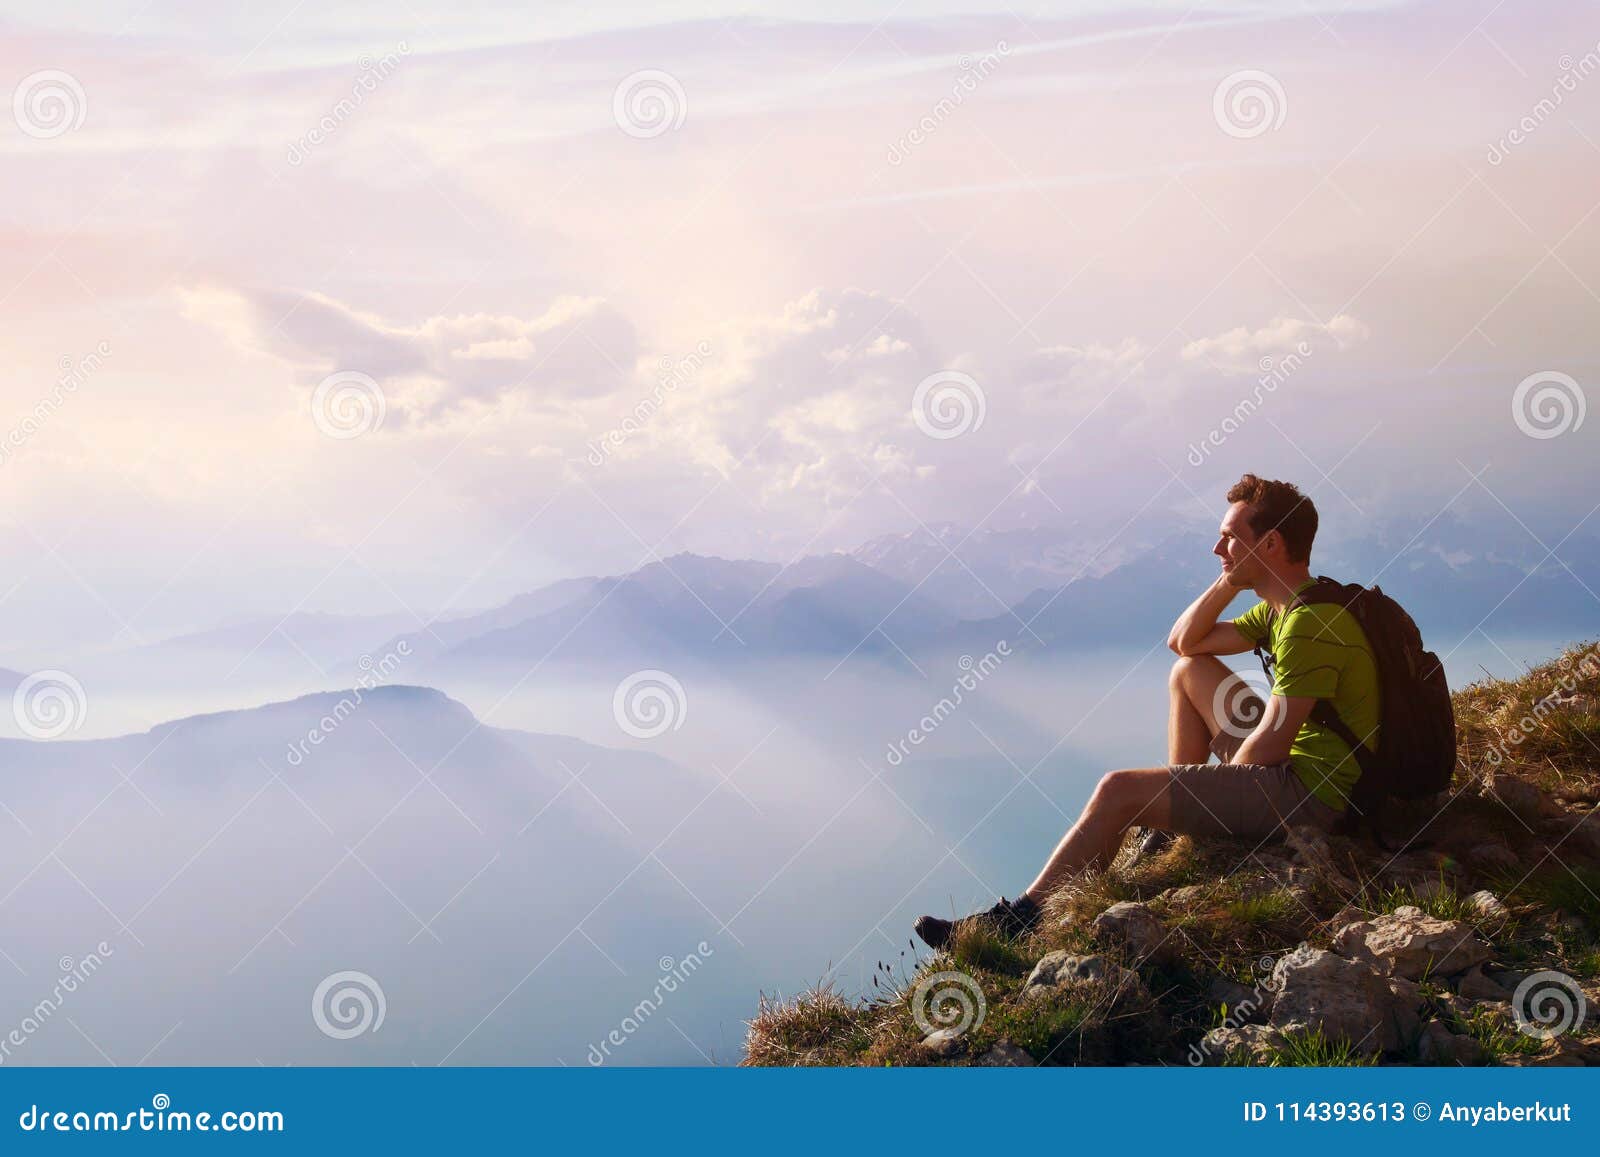 man sitting on top of mountain, achievement or opportunity concept, hiker